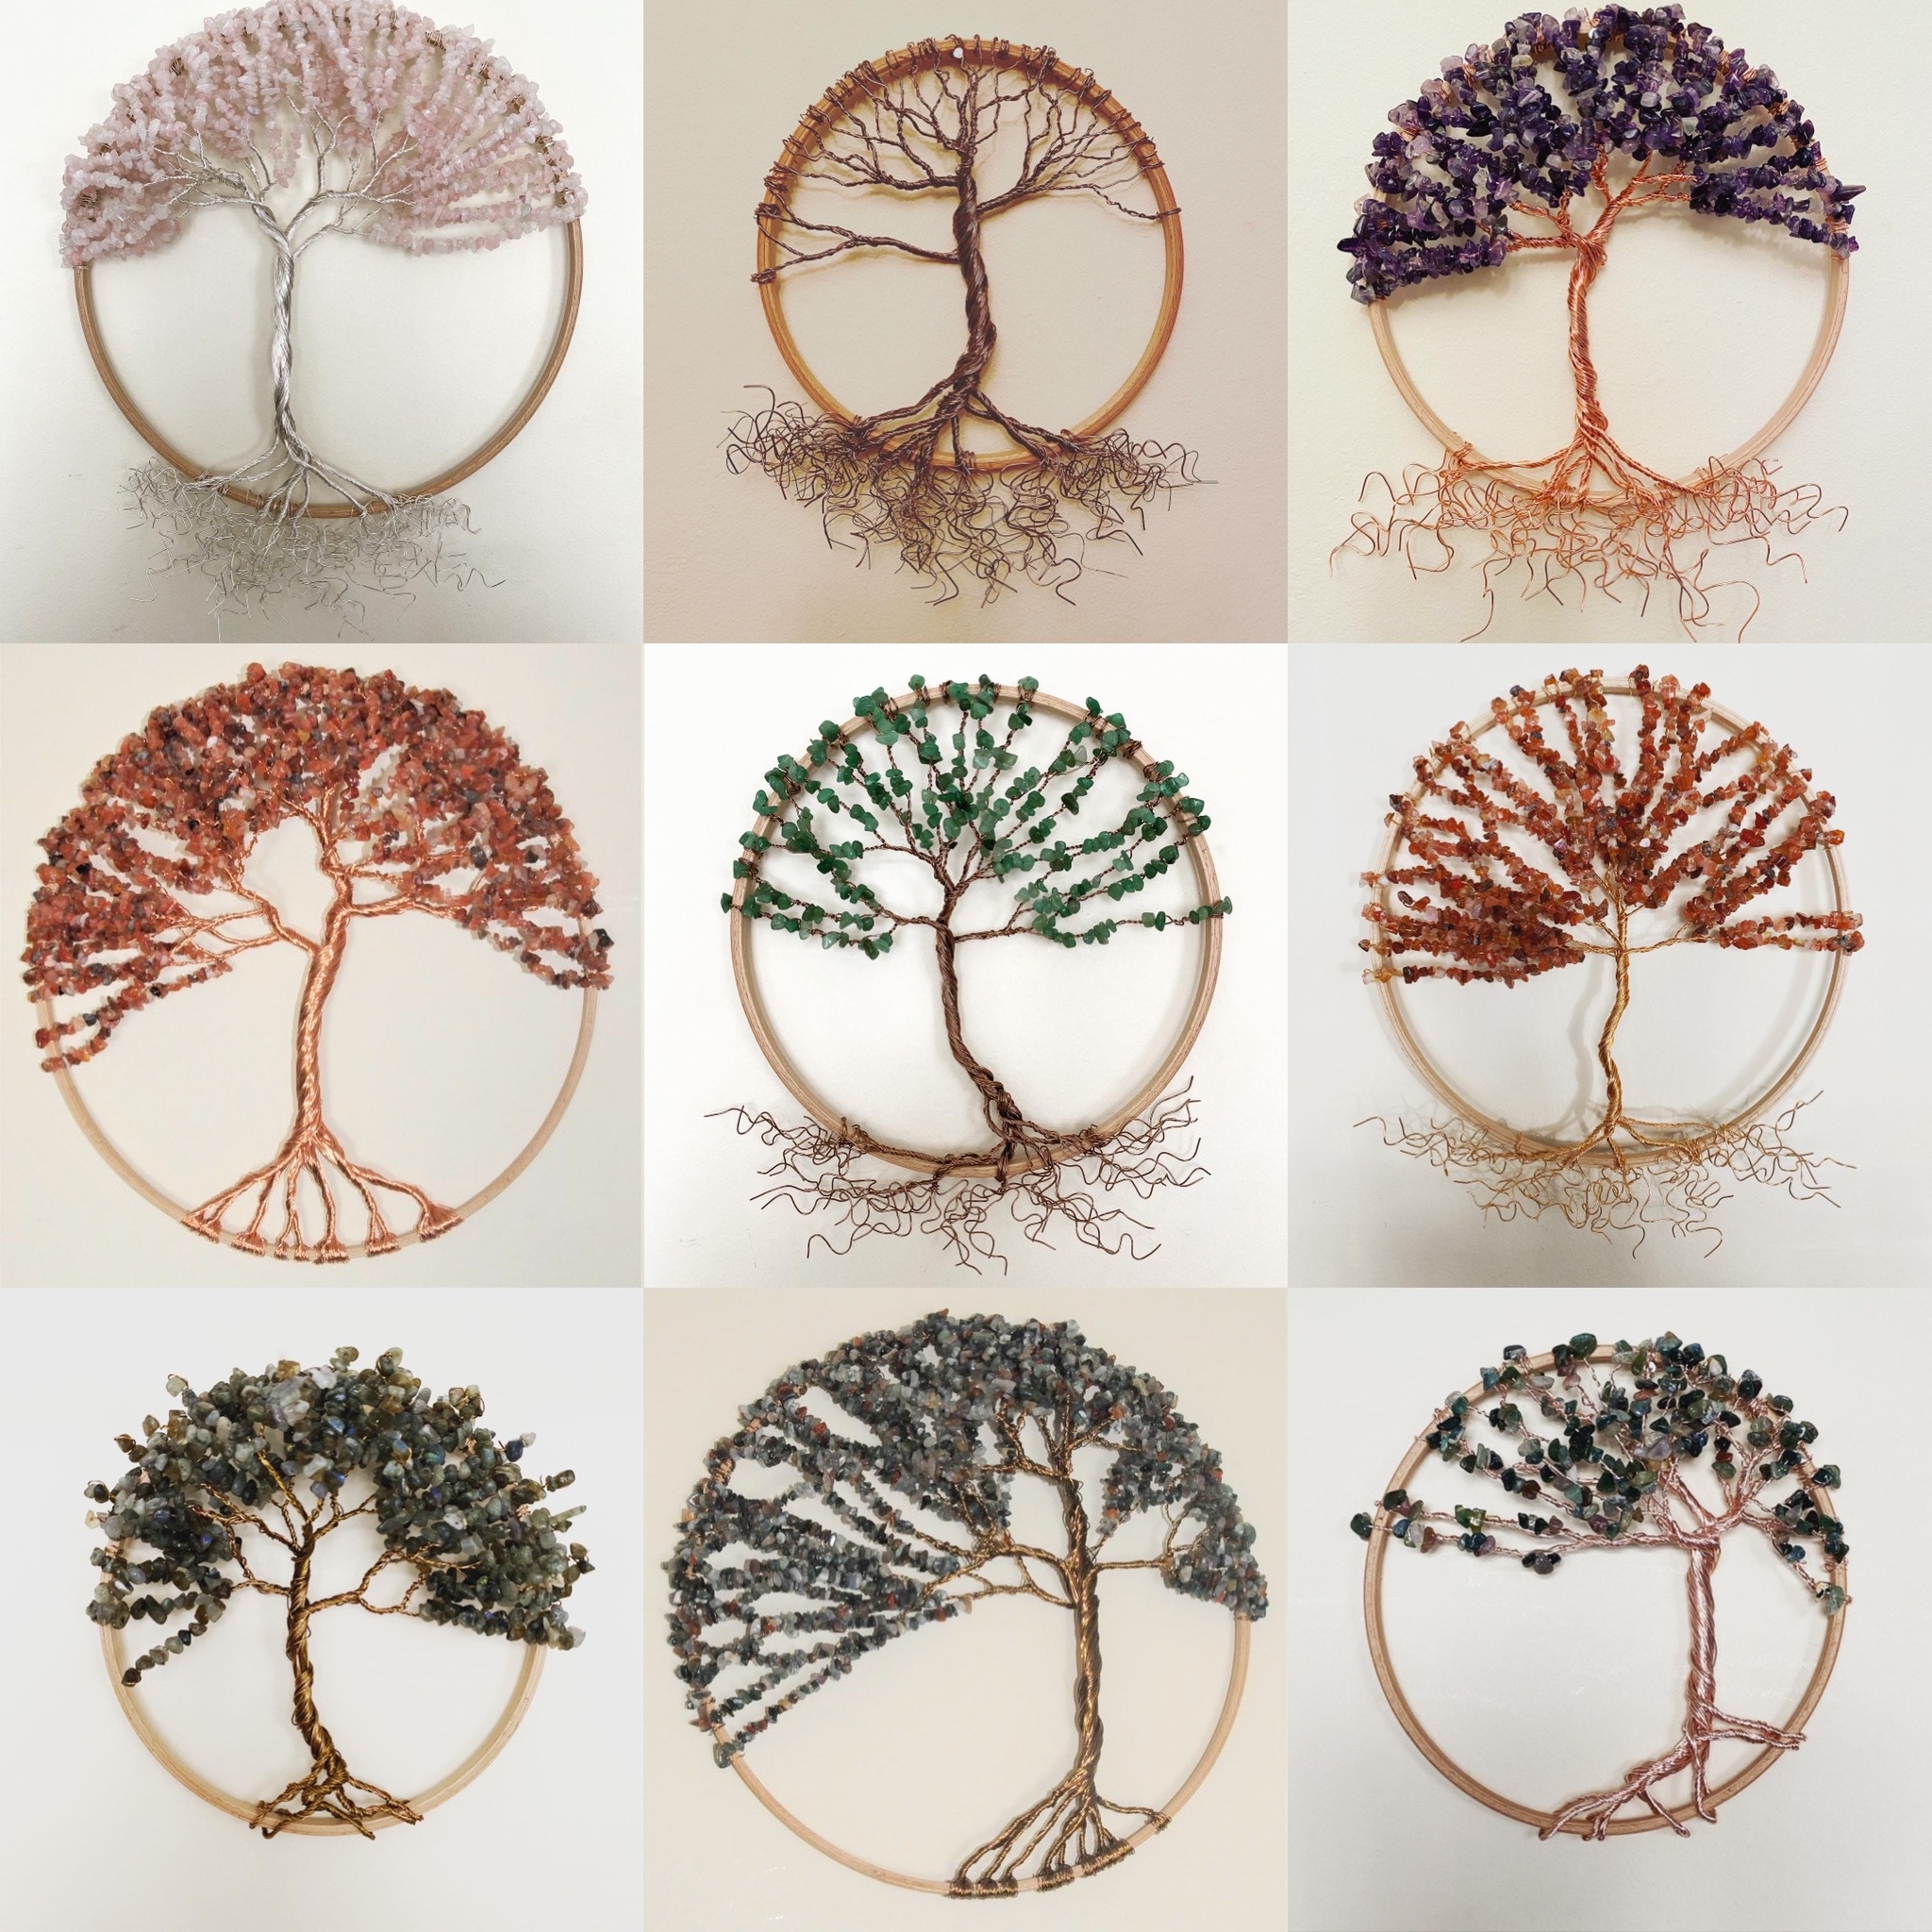 Circular Framed Tree of Life wire and gemstone sculpturesJPG